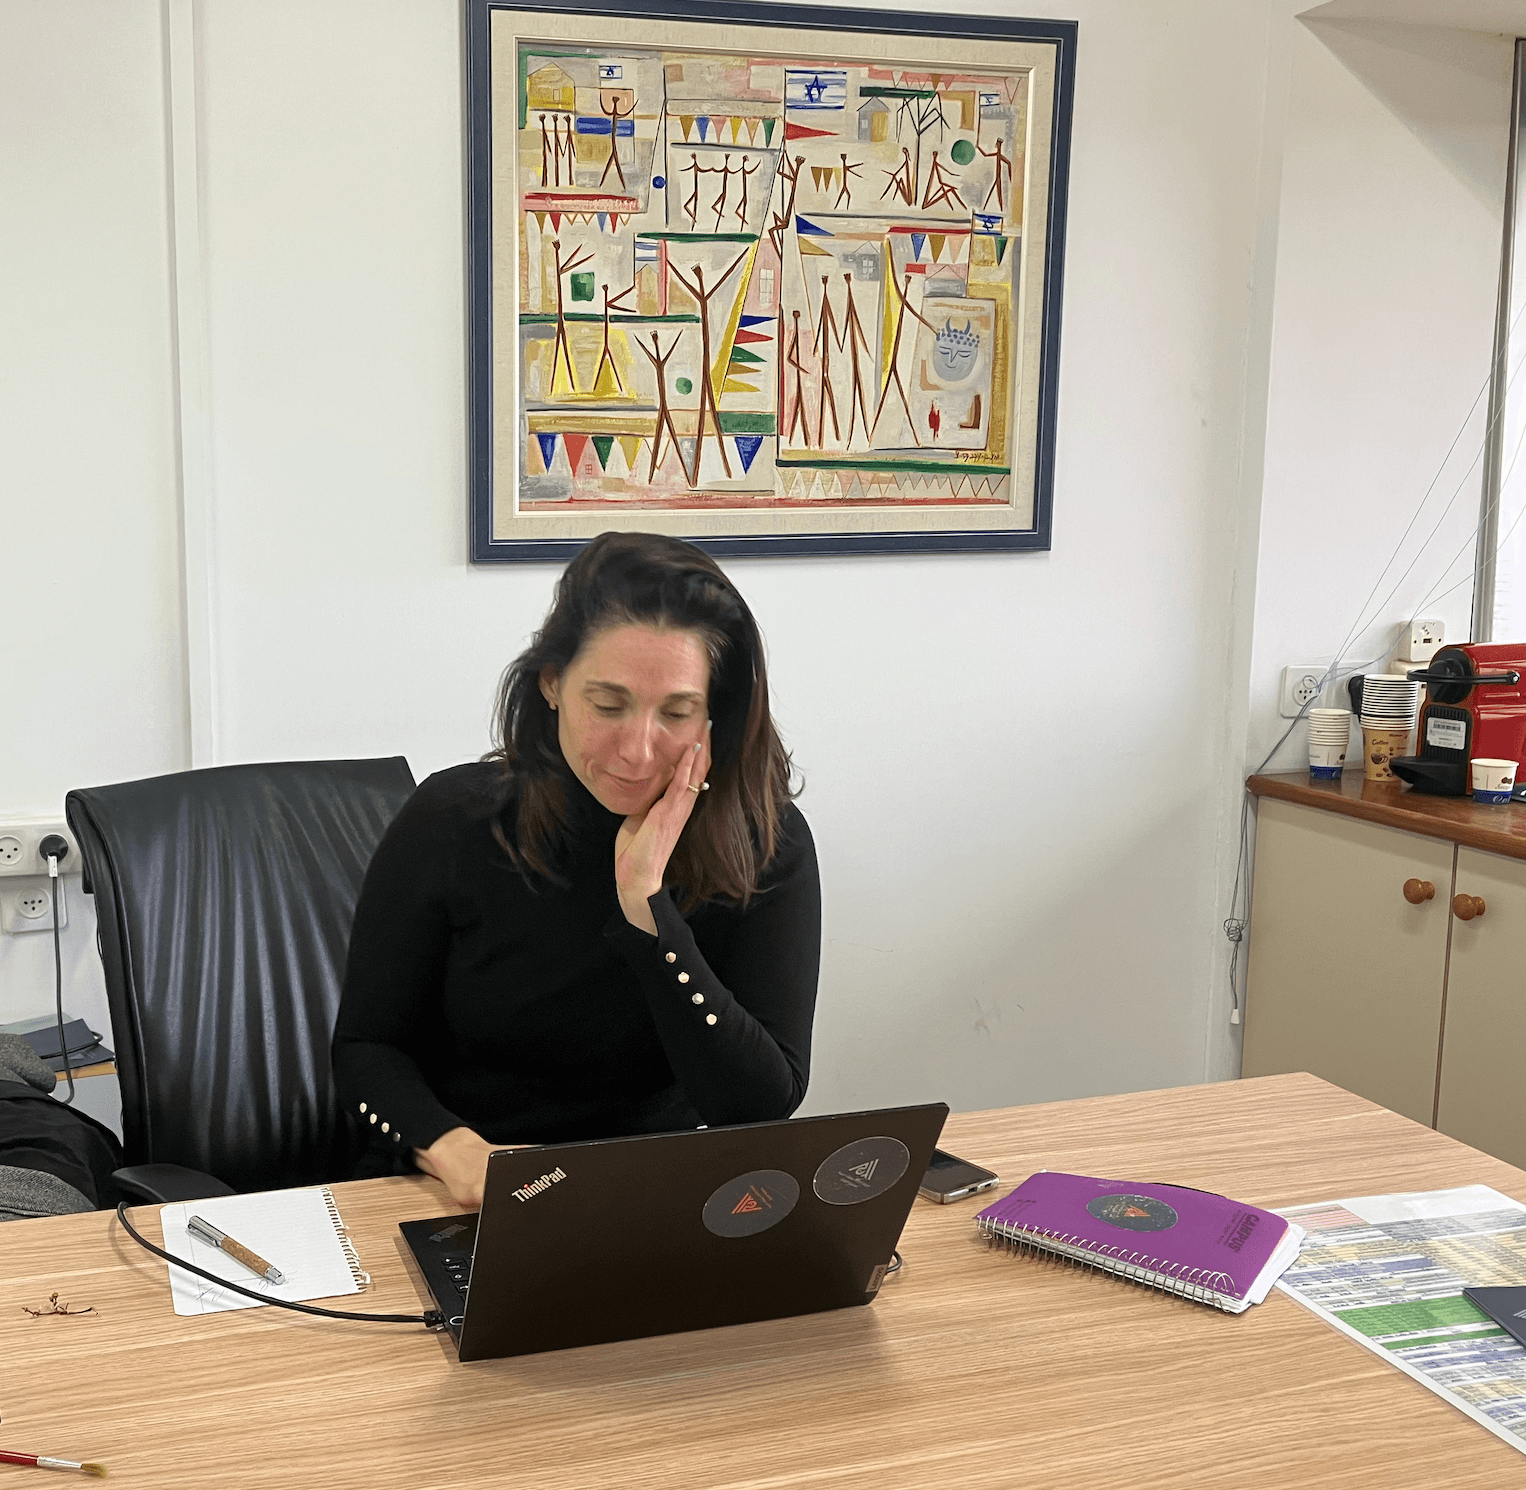 Michal Sella, the CEO of Givat Haviva, says schools like hers are a rarity in Israel where segregated classes between Jews and Arabs are the norm.